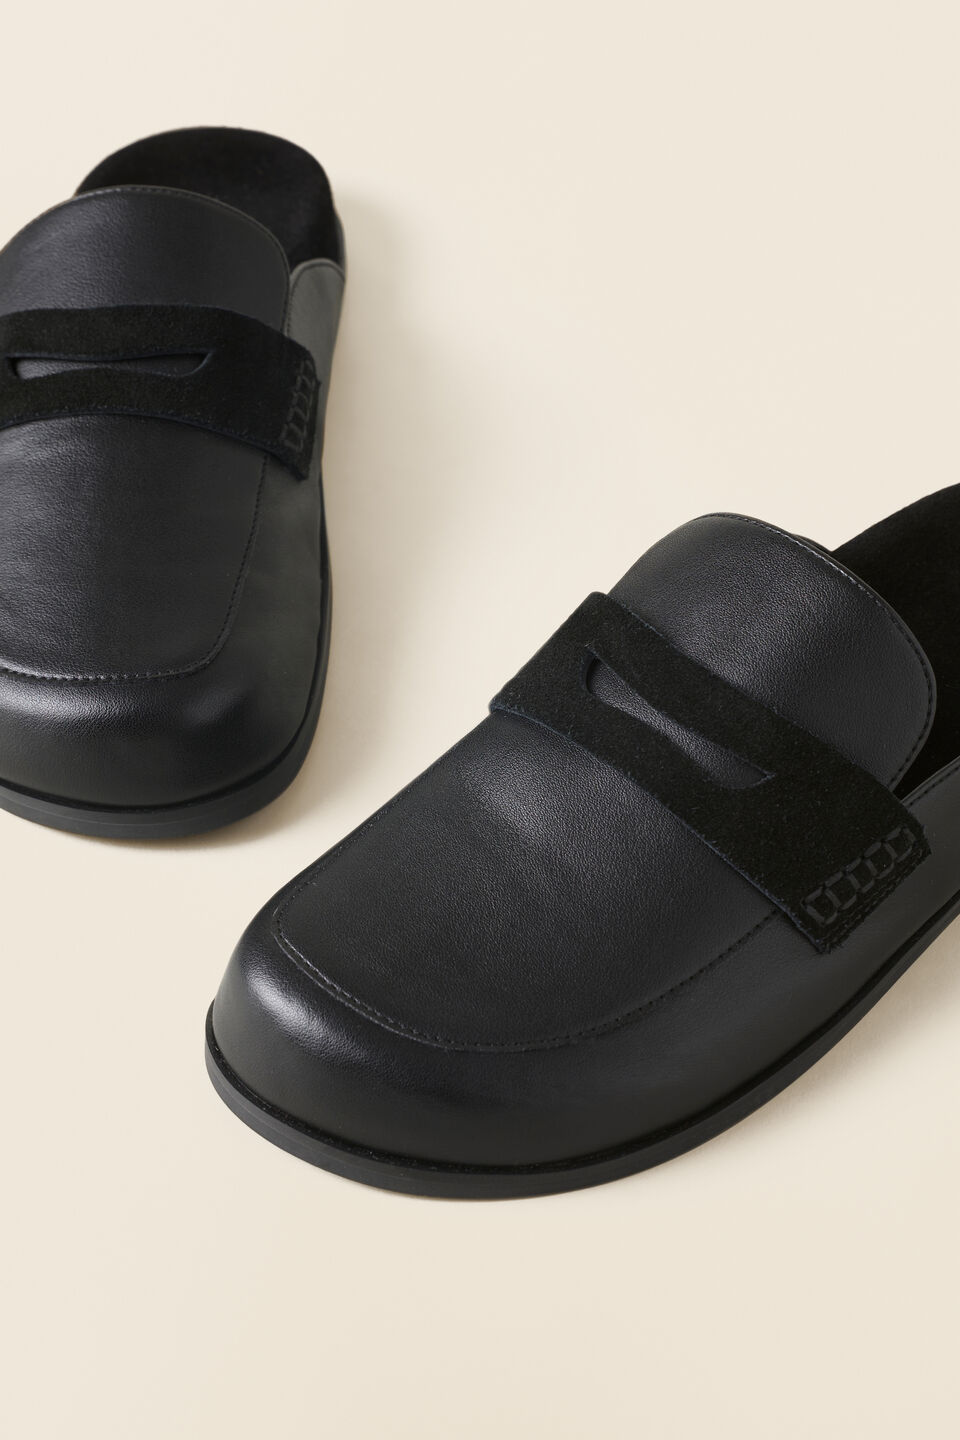 Willow Leather Loafer Mule  Black